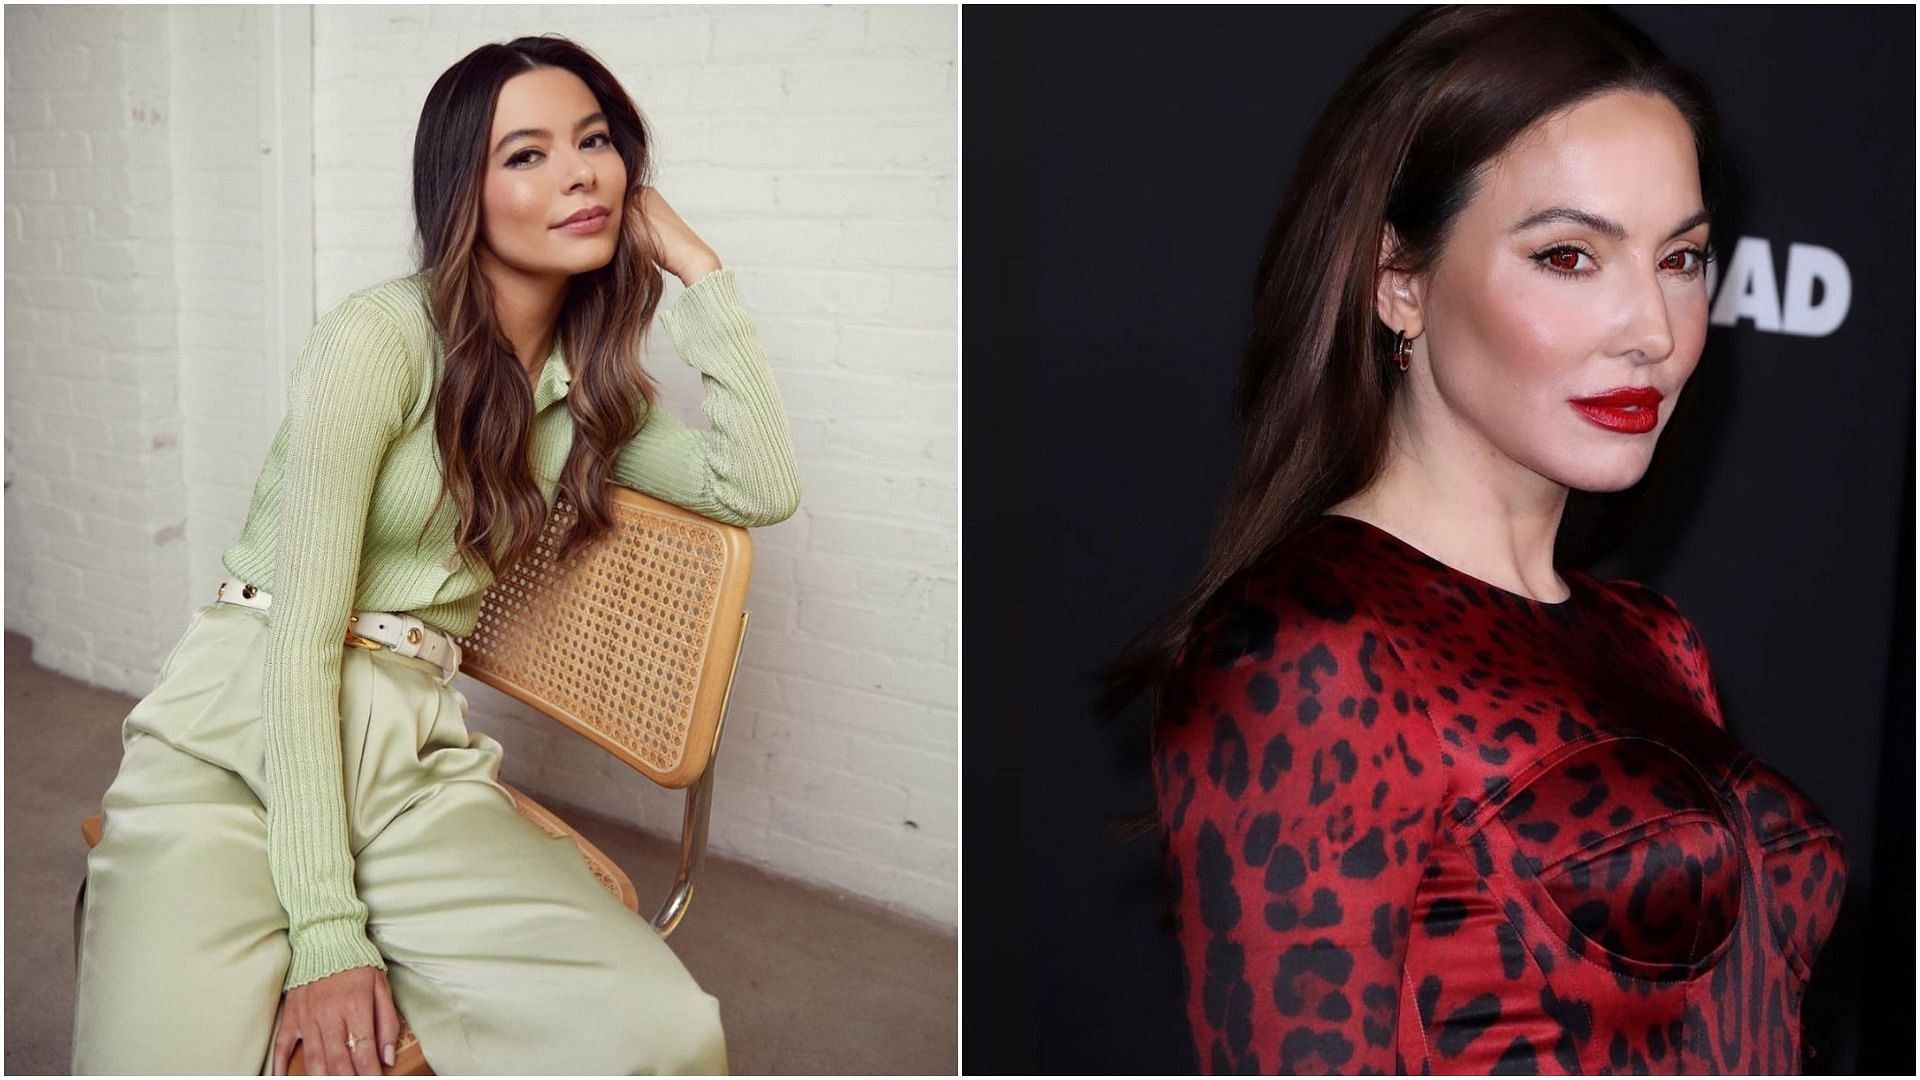 Audio featuring Miranda Cosgrove cussing in a Whitney Cummings podcast has become a viral sound on TikTok (Image via Miranda Cosgrove and Whitney Cummings/Instagram)